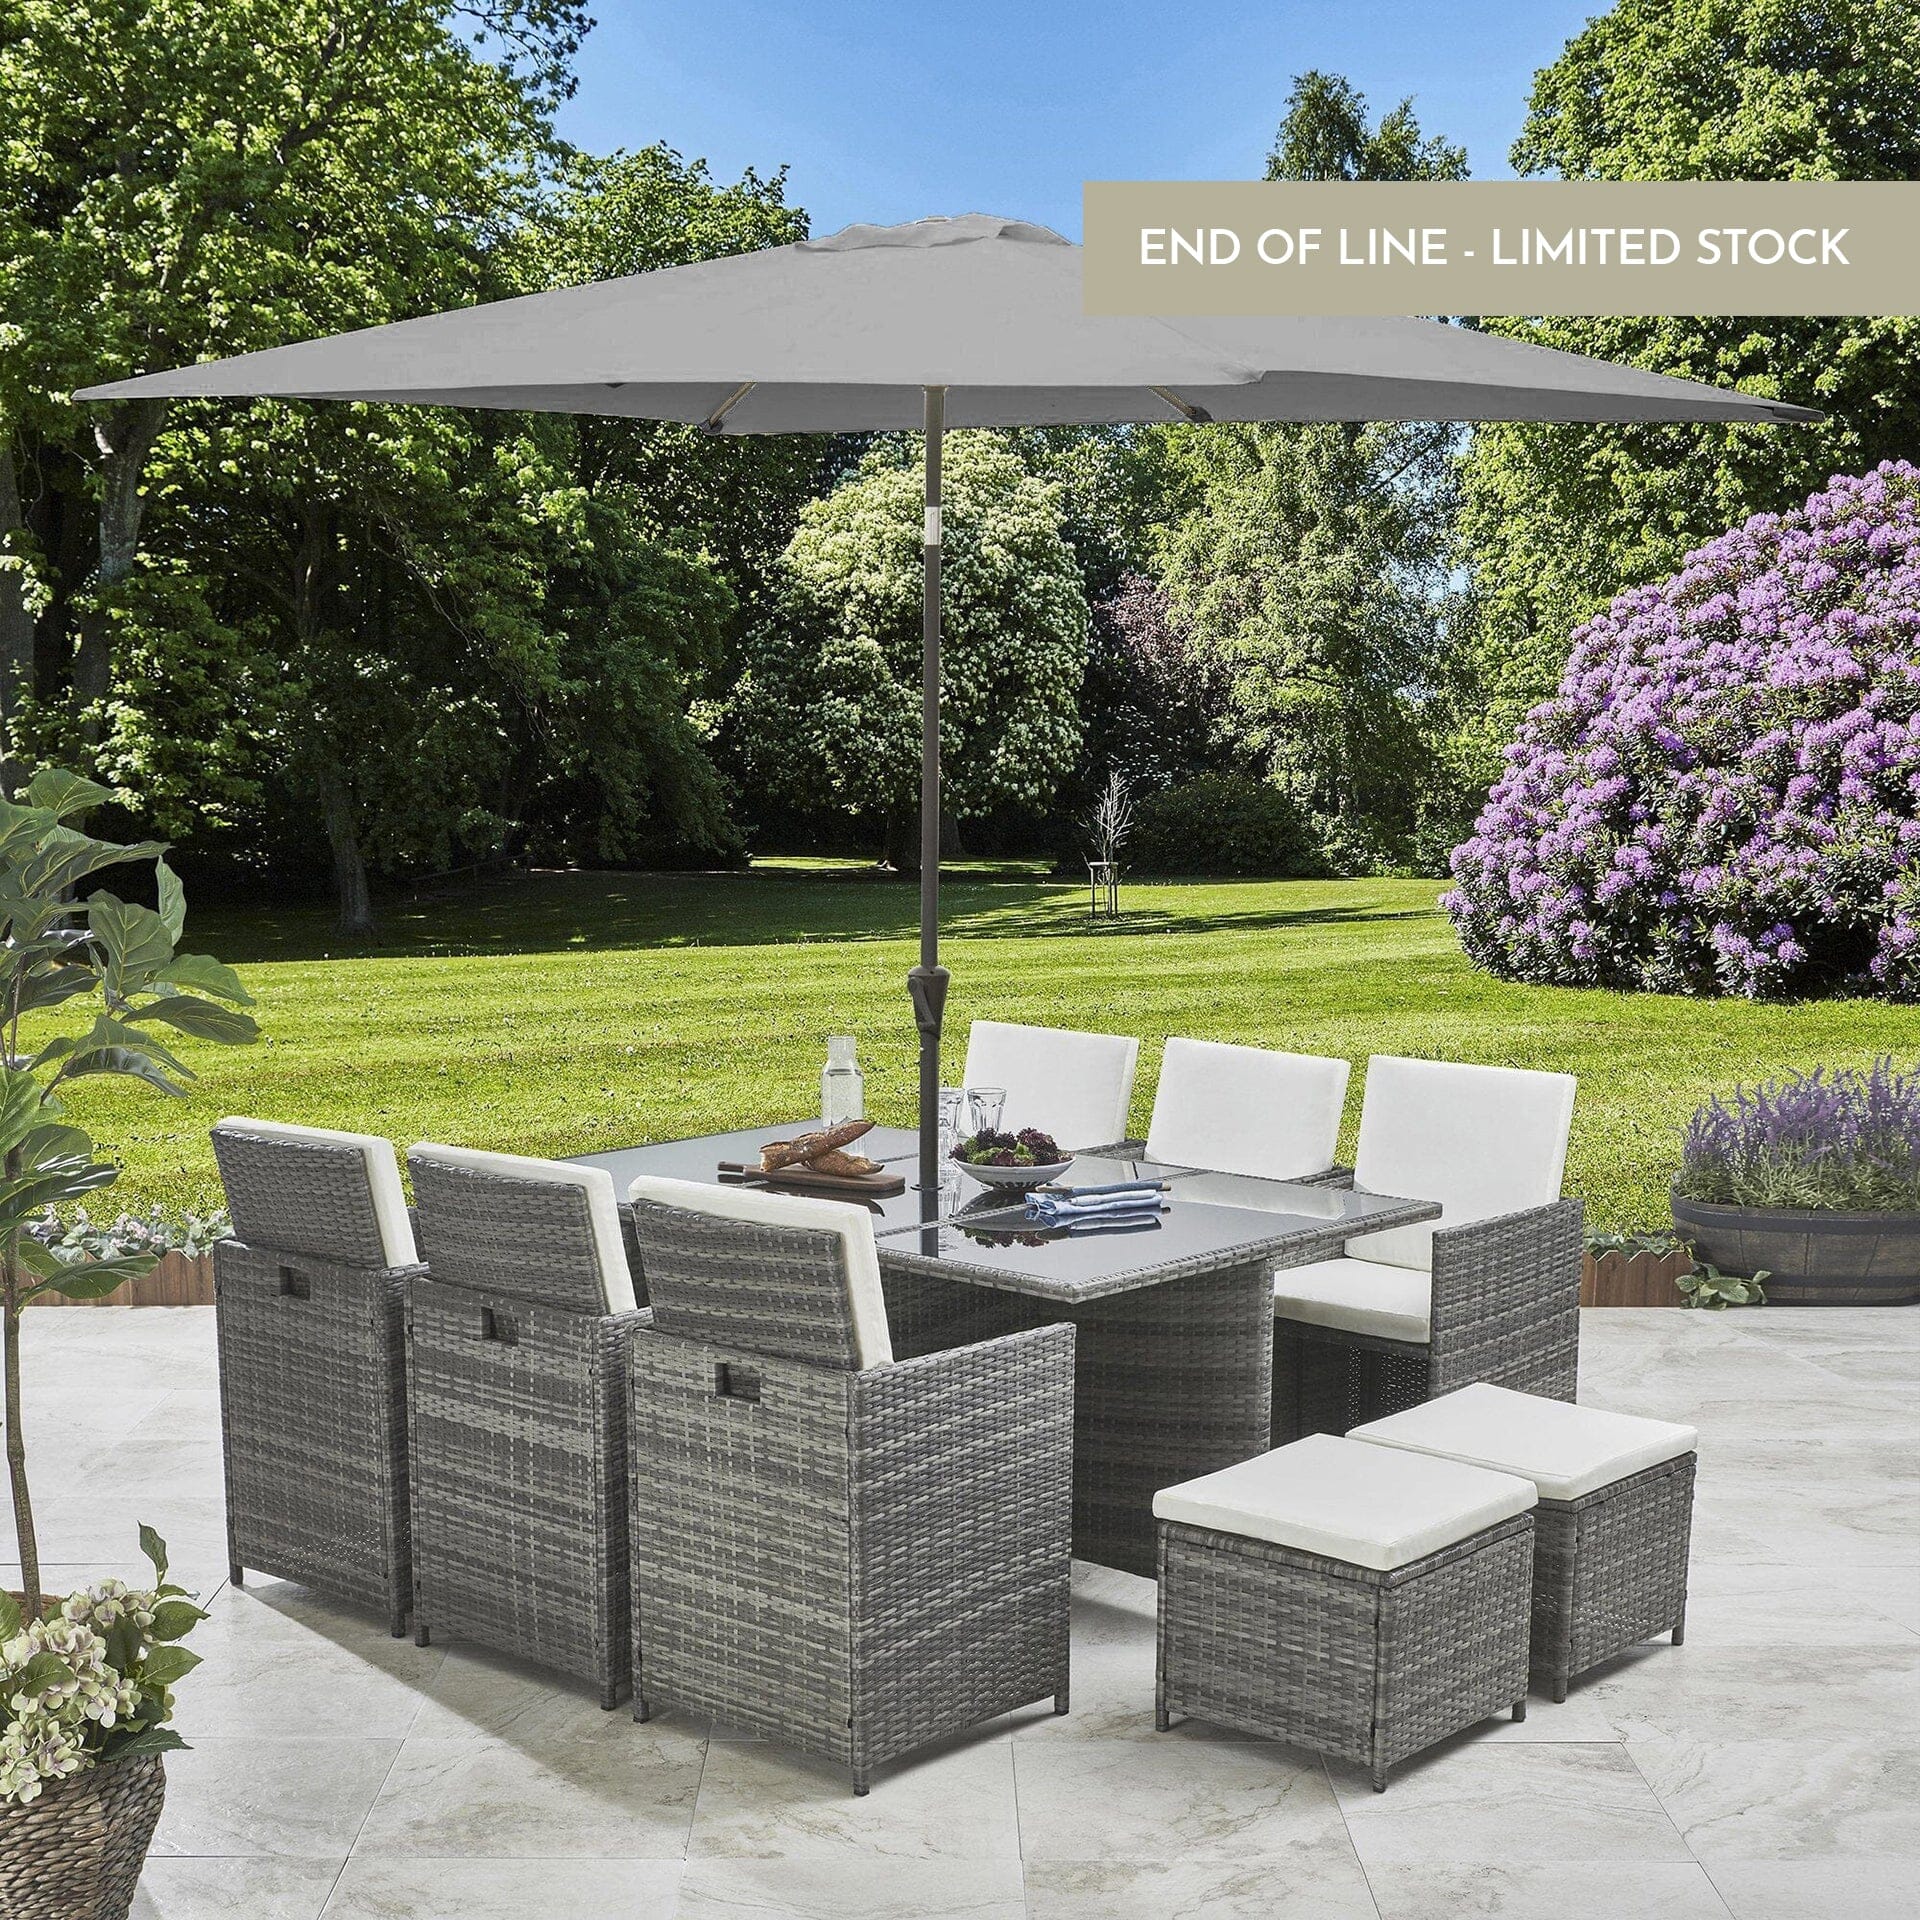 10 Seater Rattan Cube Garden Set with Grey Parasol - Outdoor Dining Furniture - (Grey Weave)